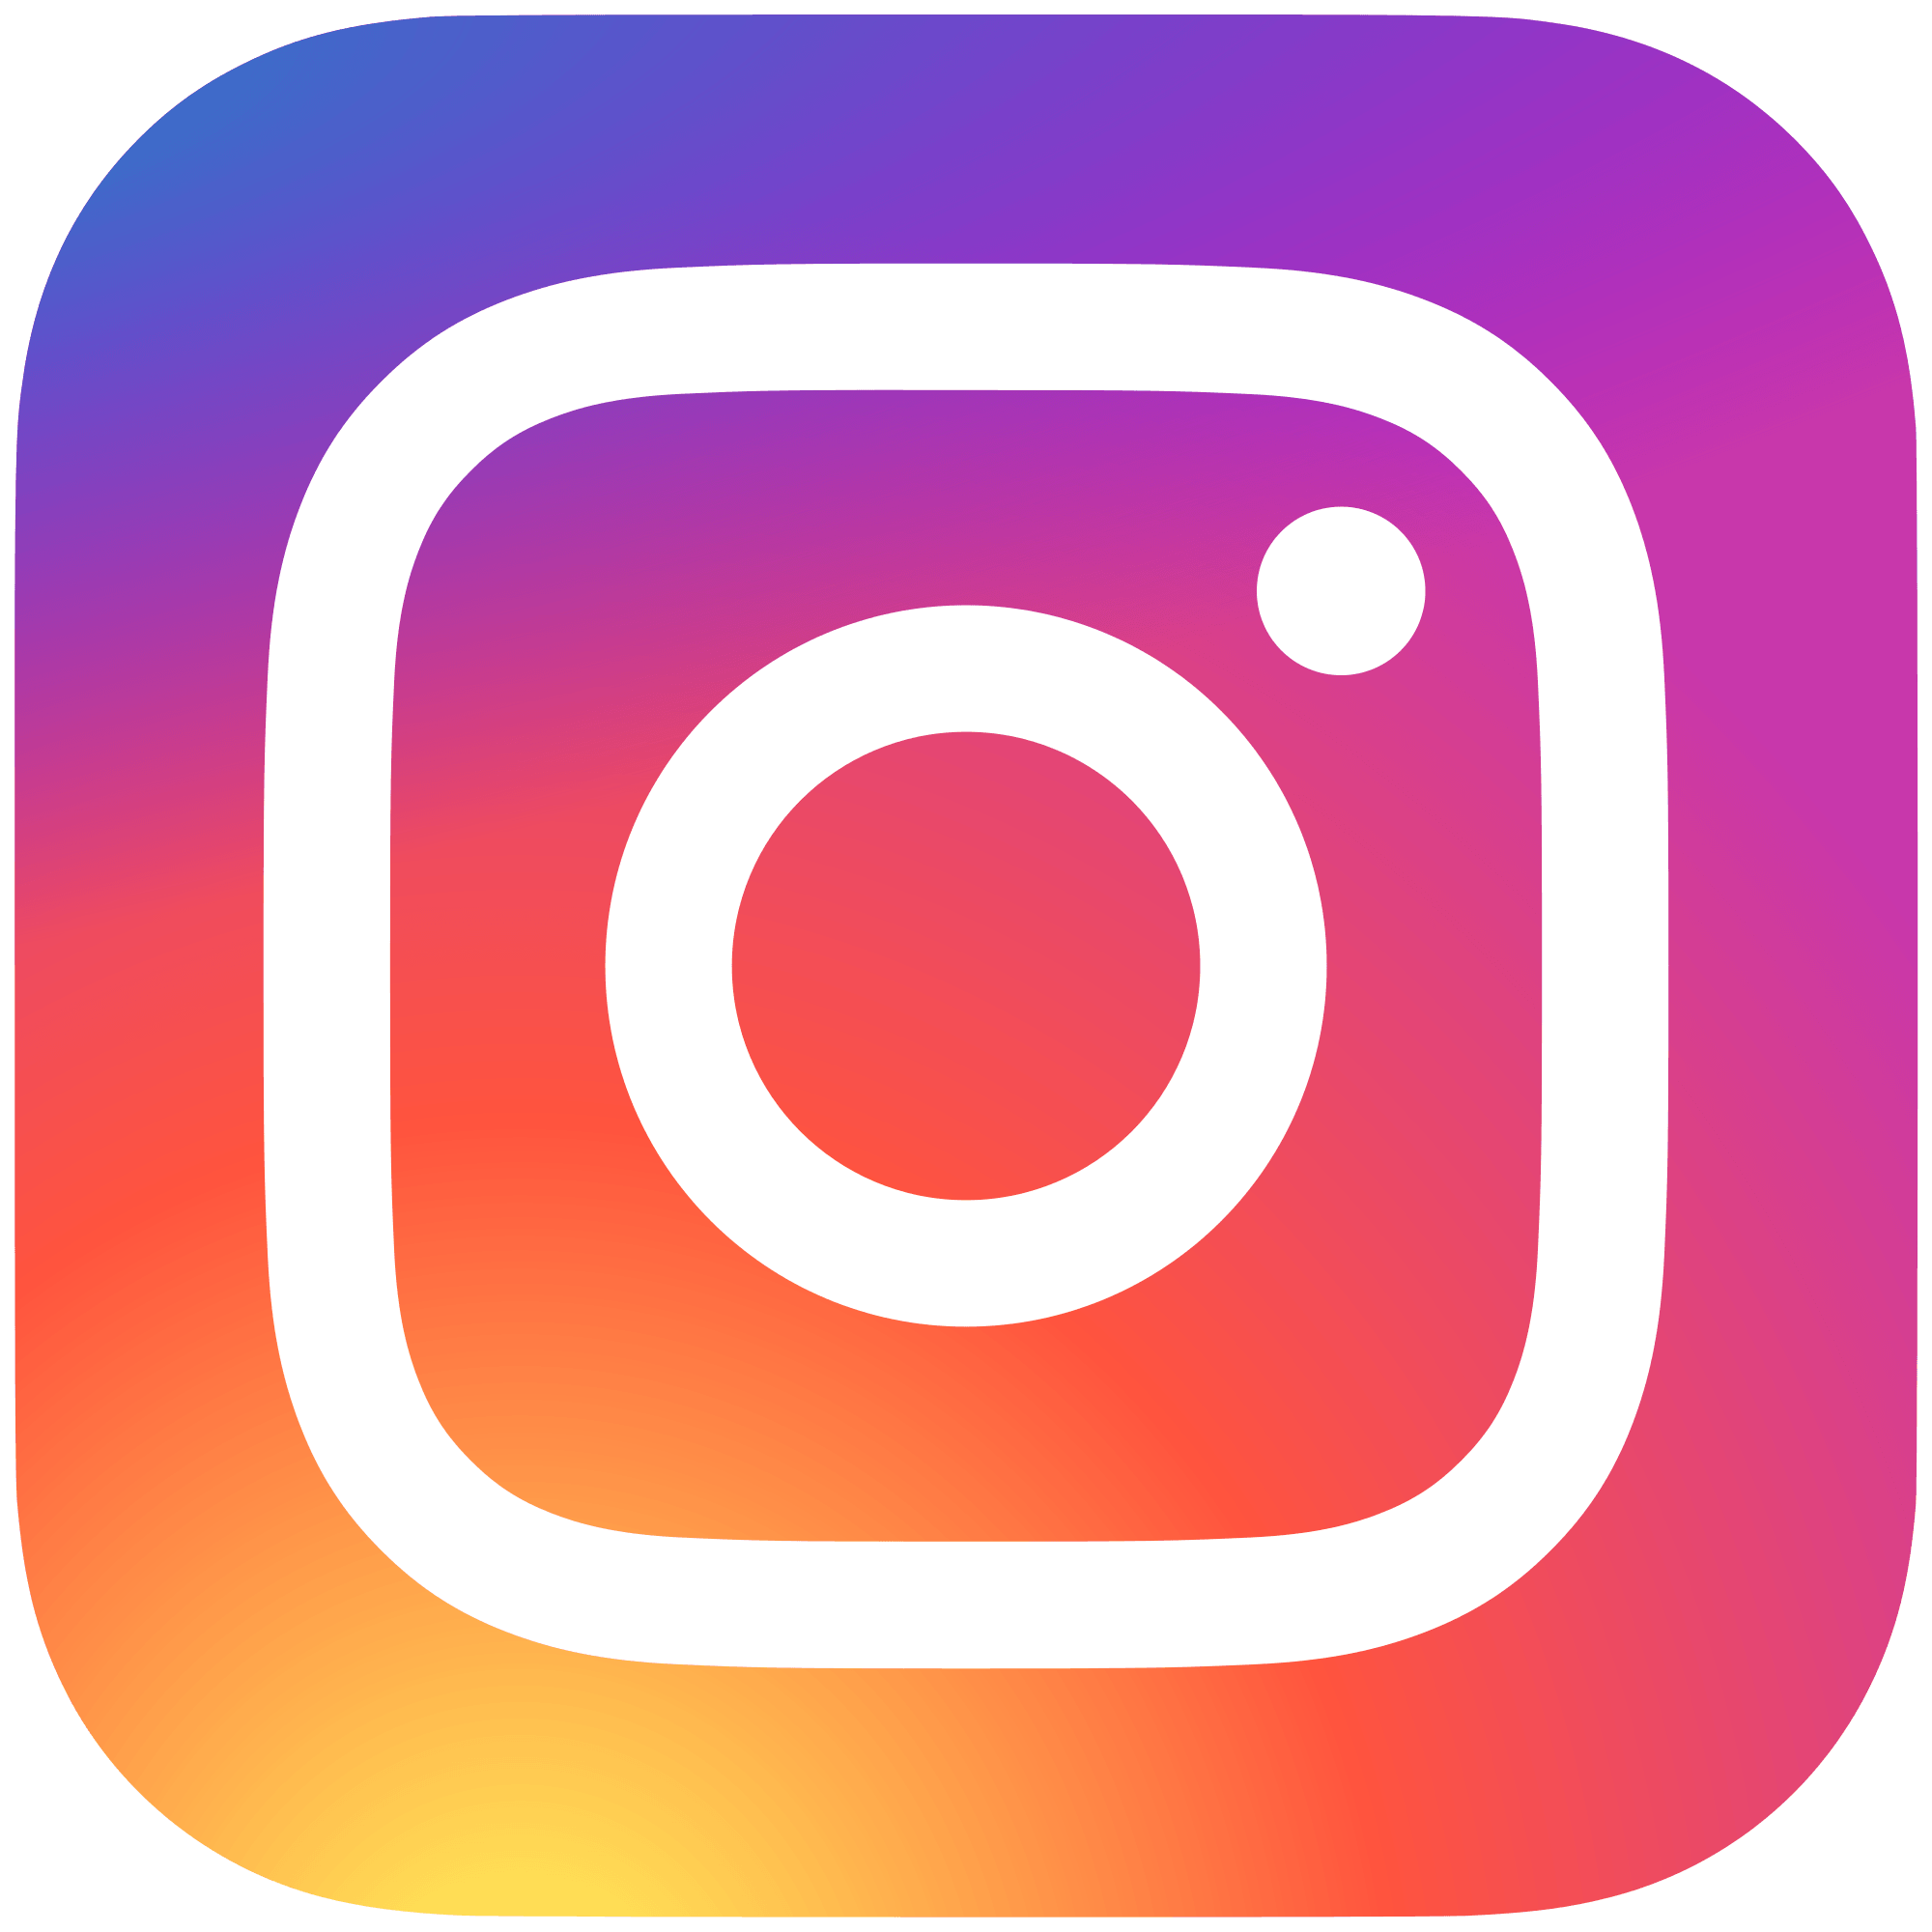 Instagtram Logo - File:Instagram icon.png - Wikimedia Commons